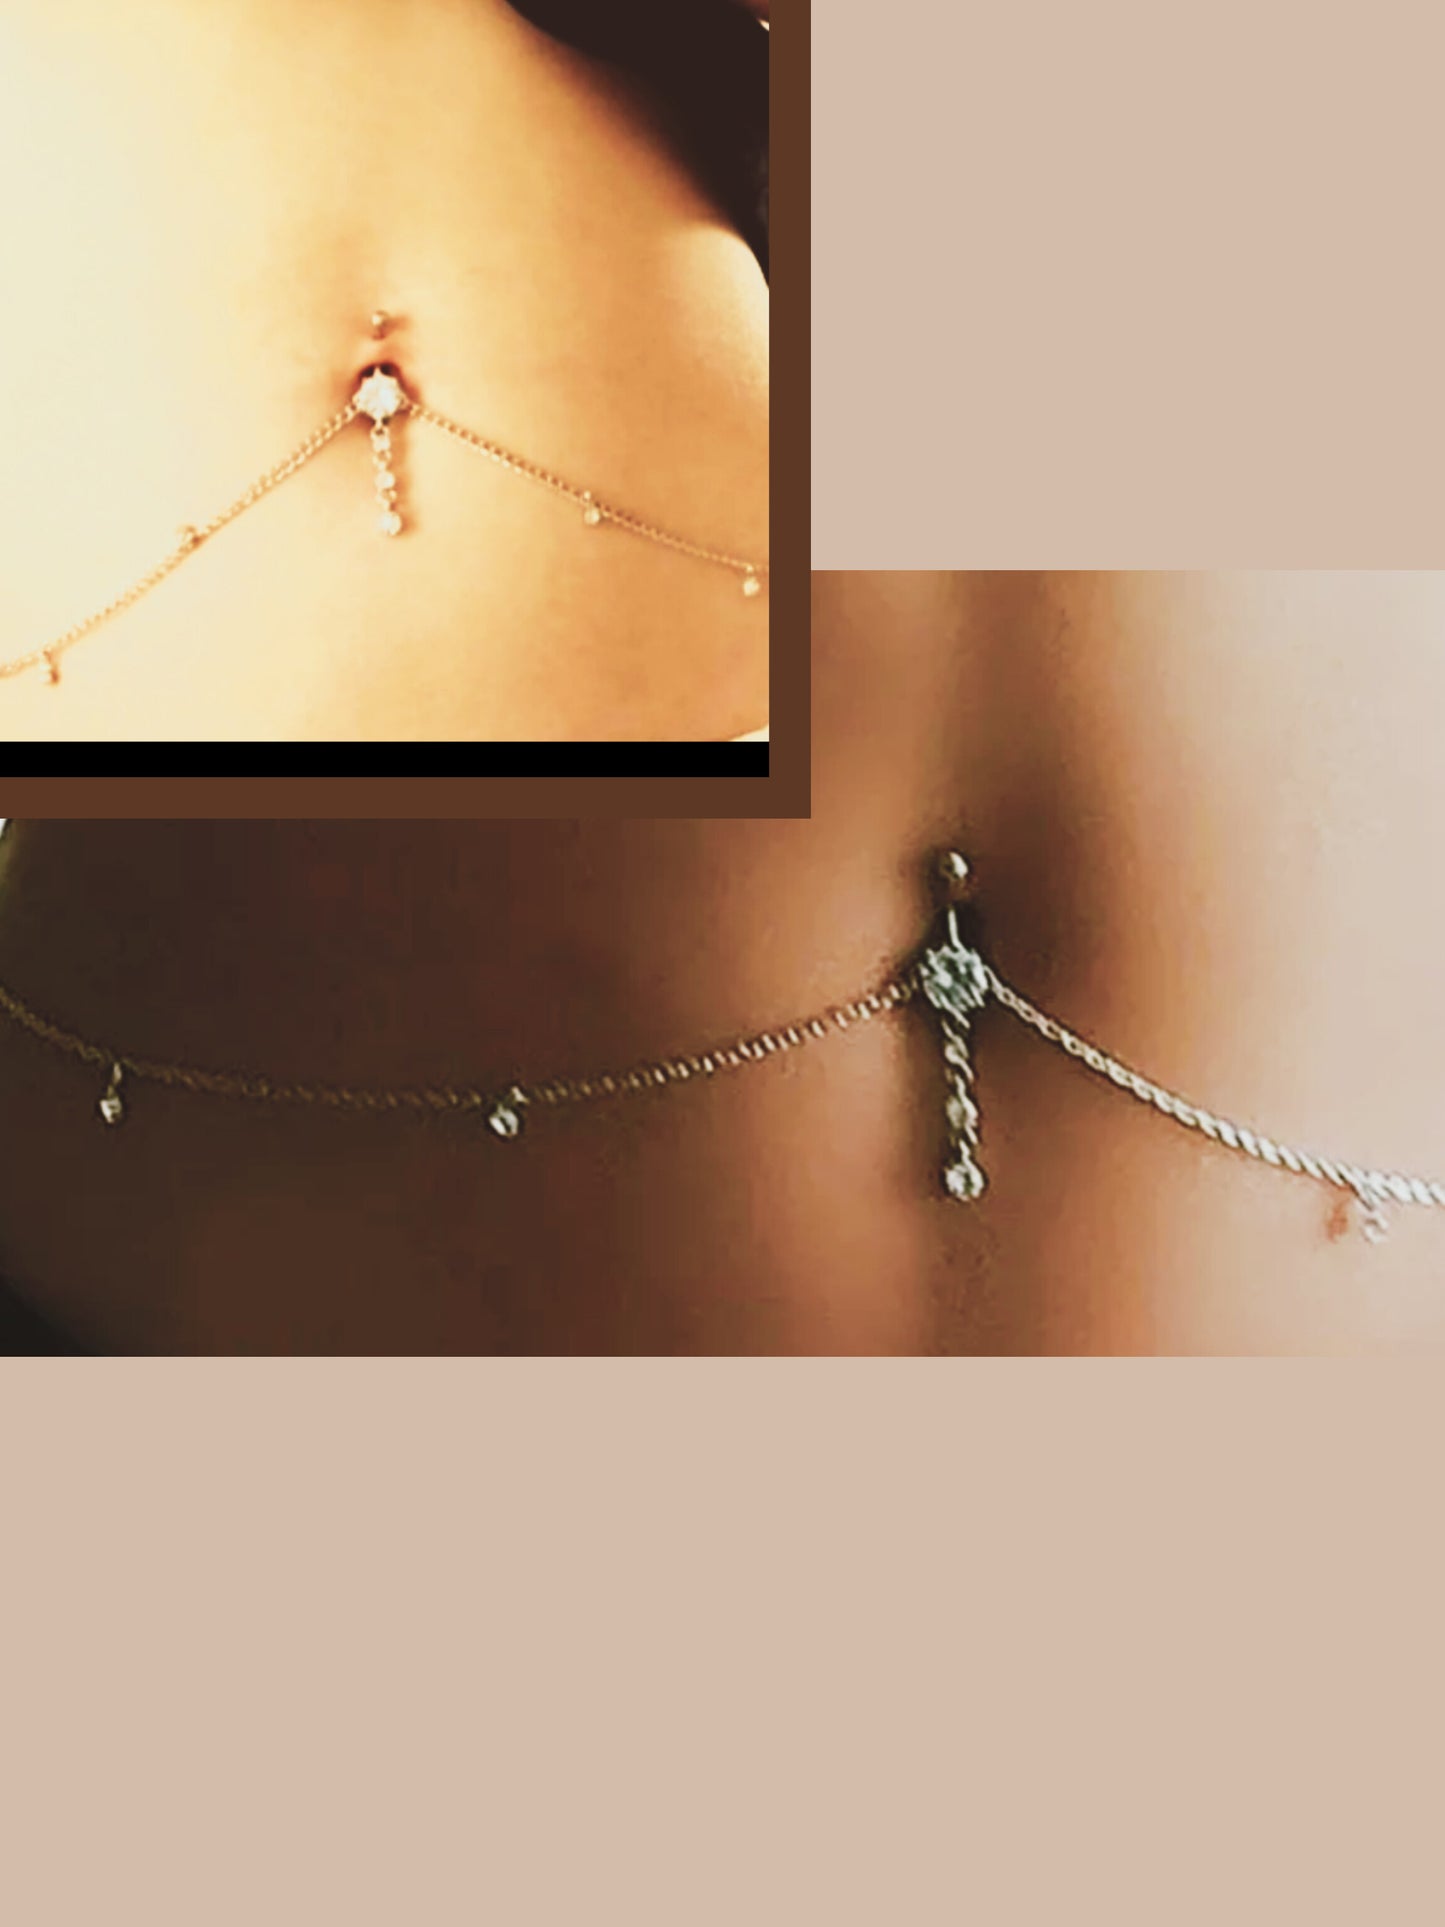 Shiny Belly Chain Piercing